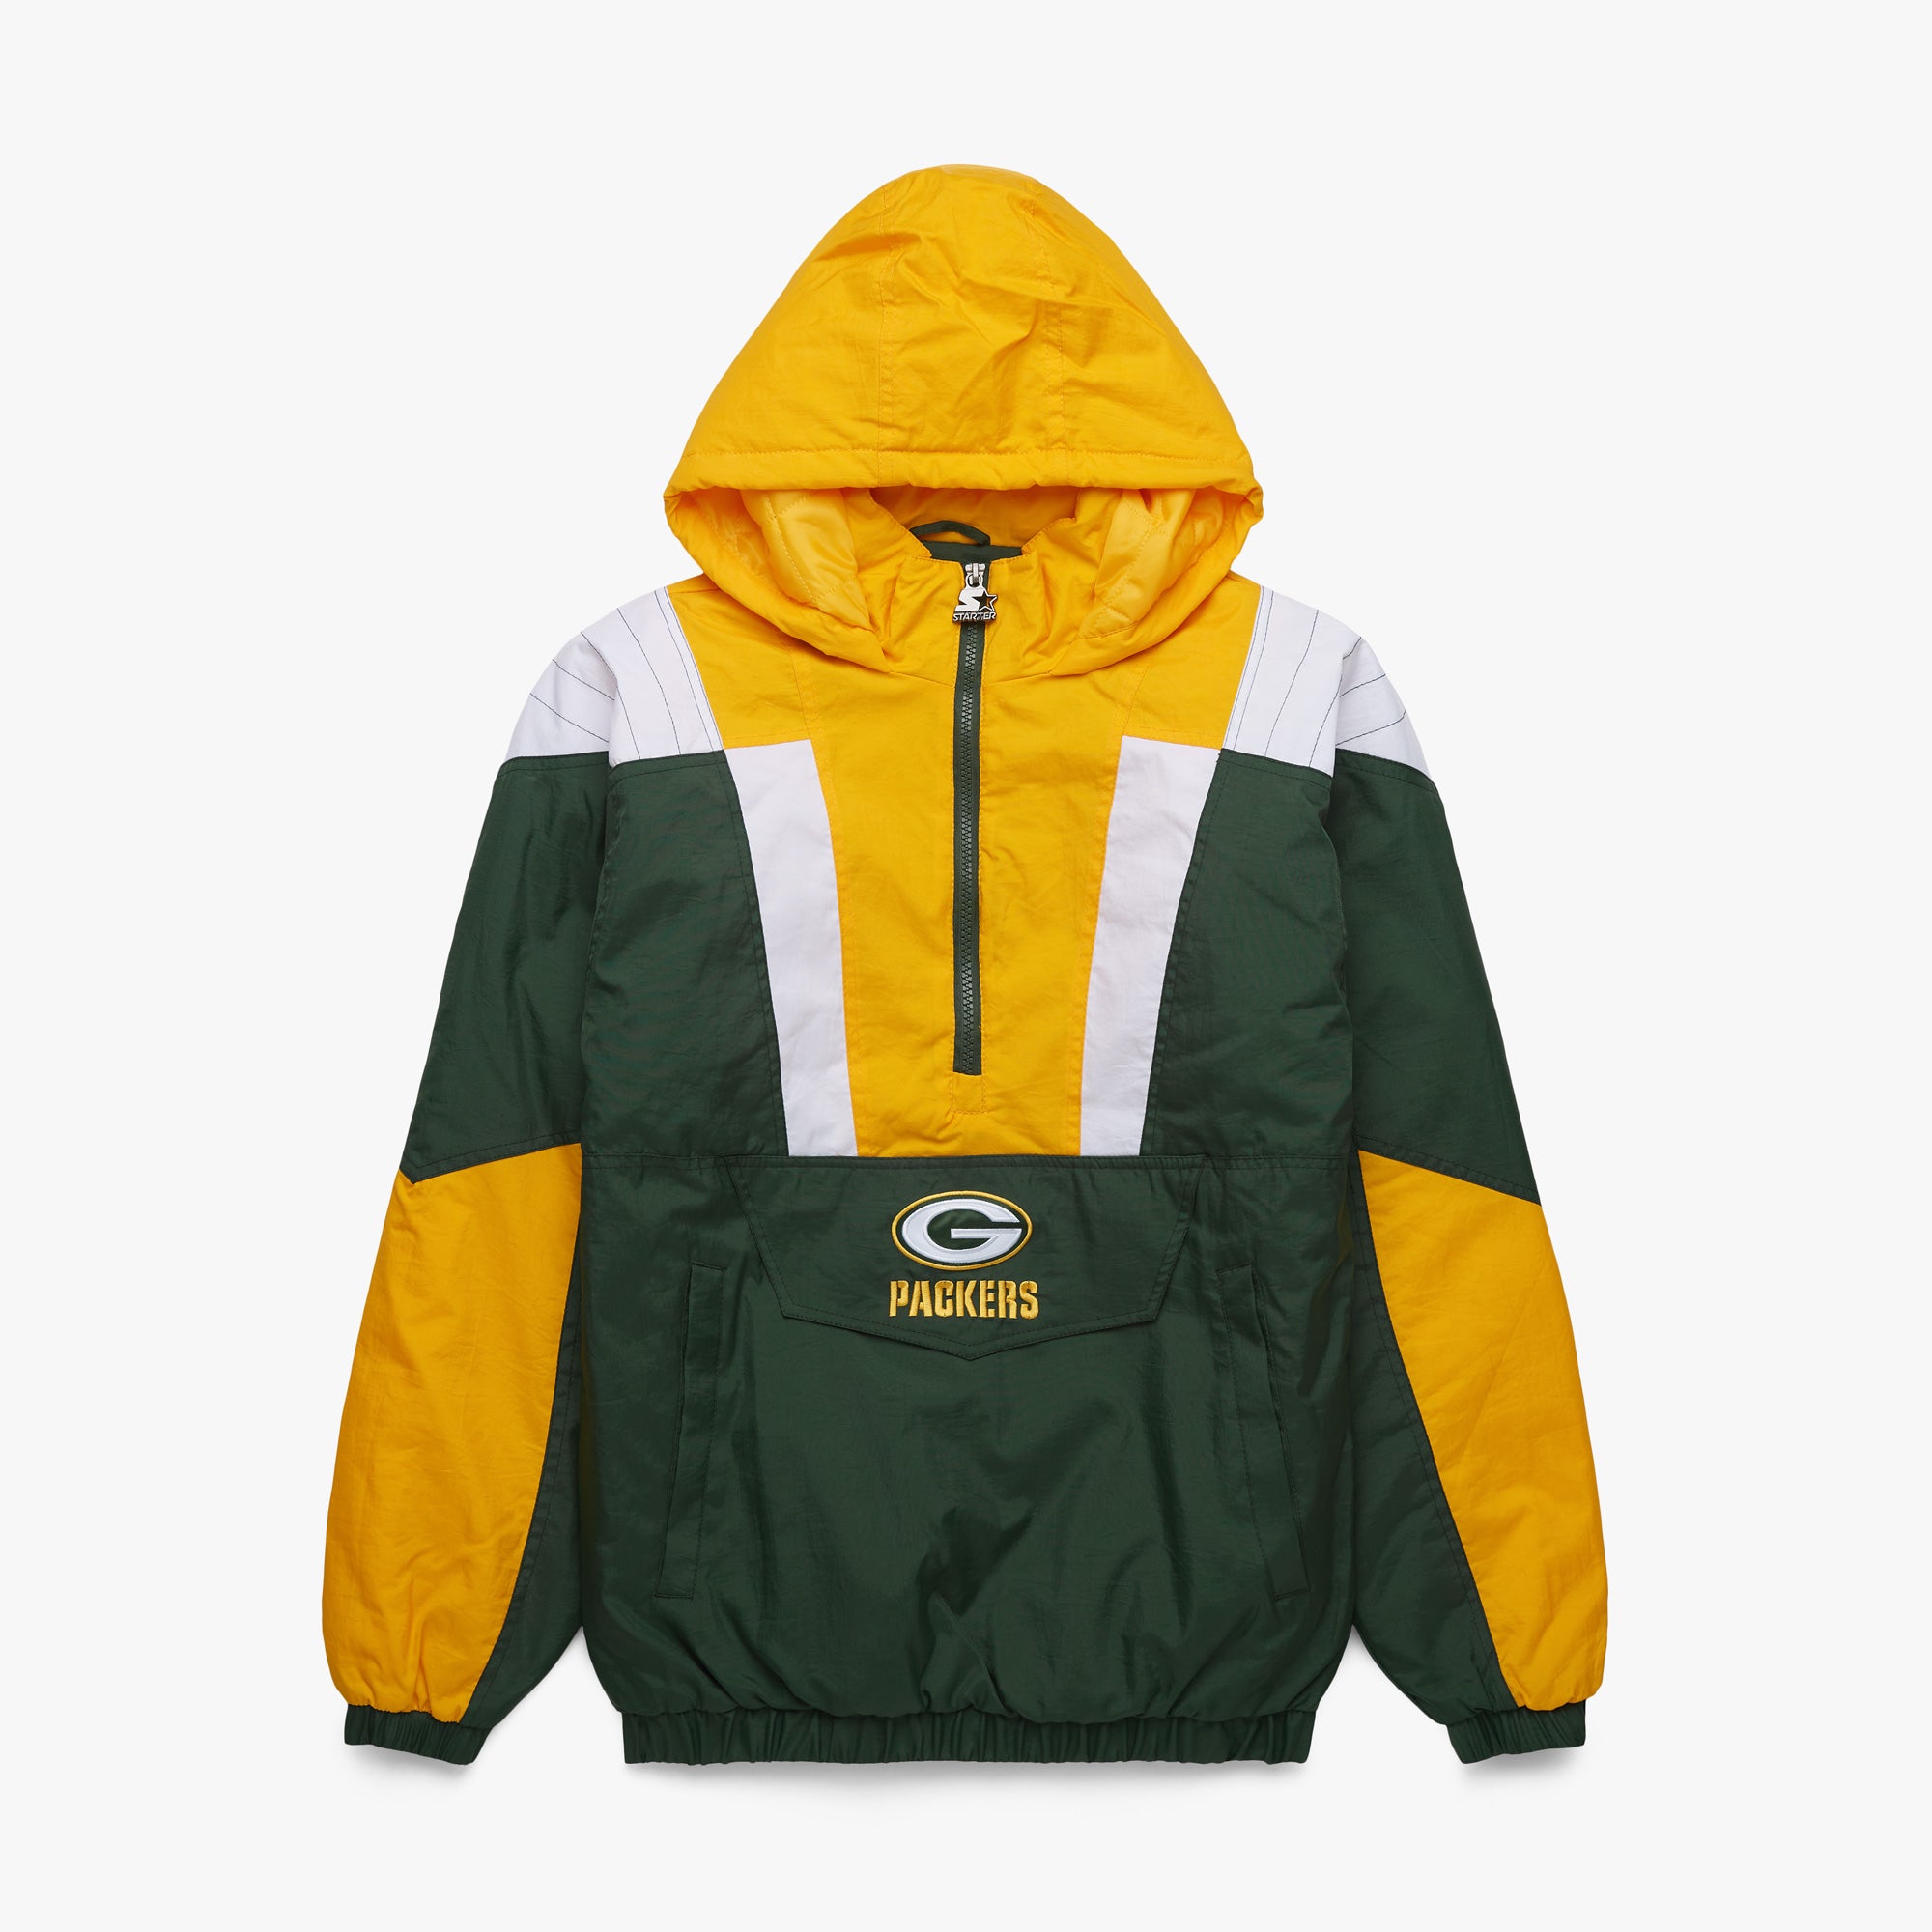 HOMAGE X Starter Packers Pullover Jacket